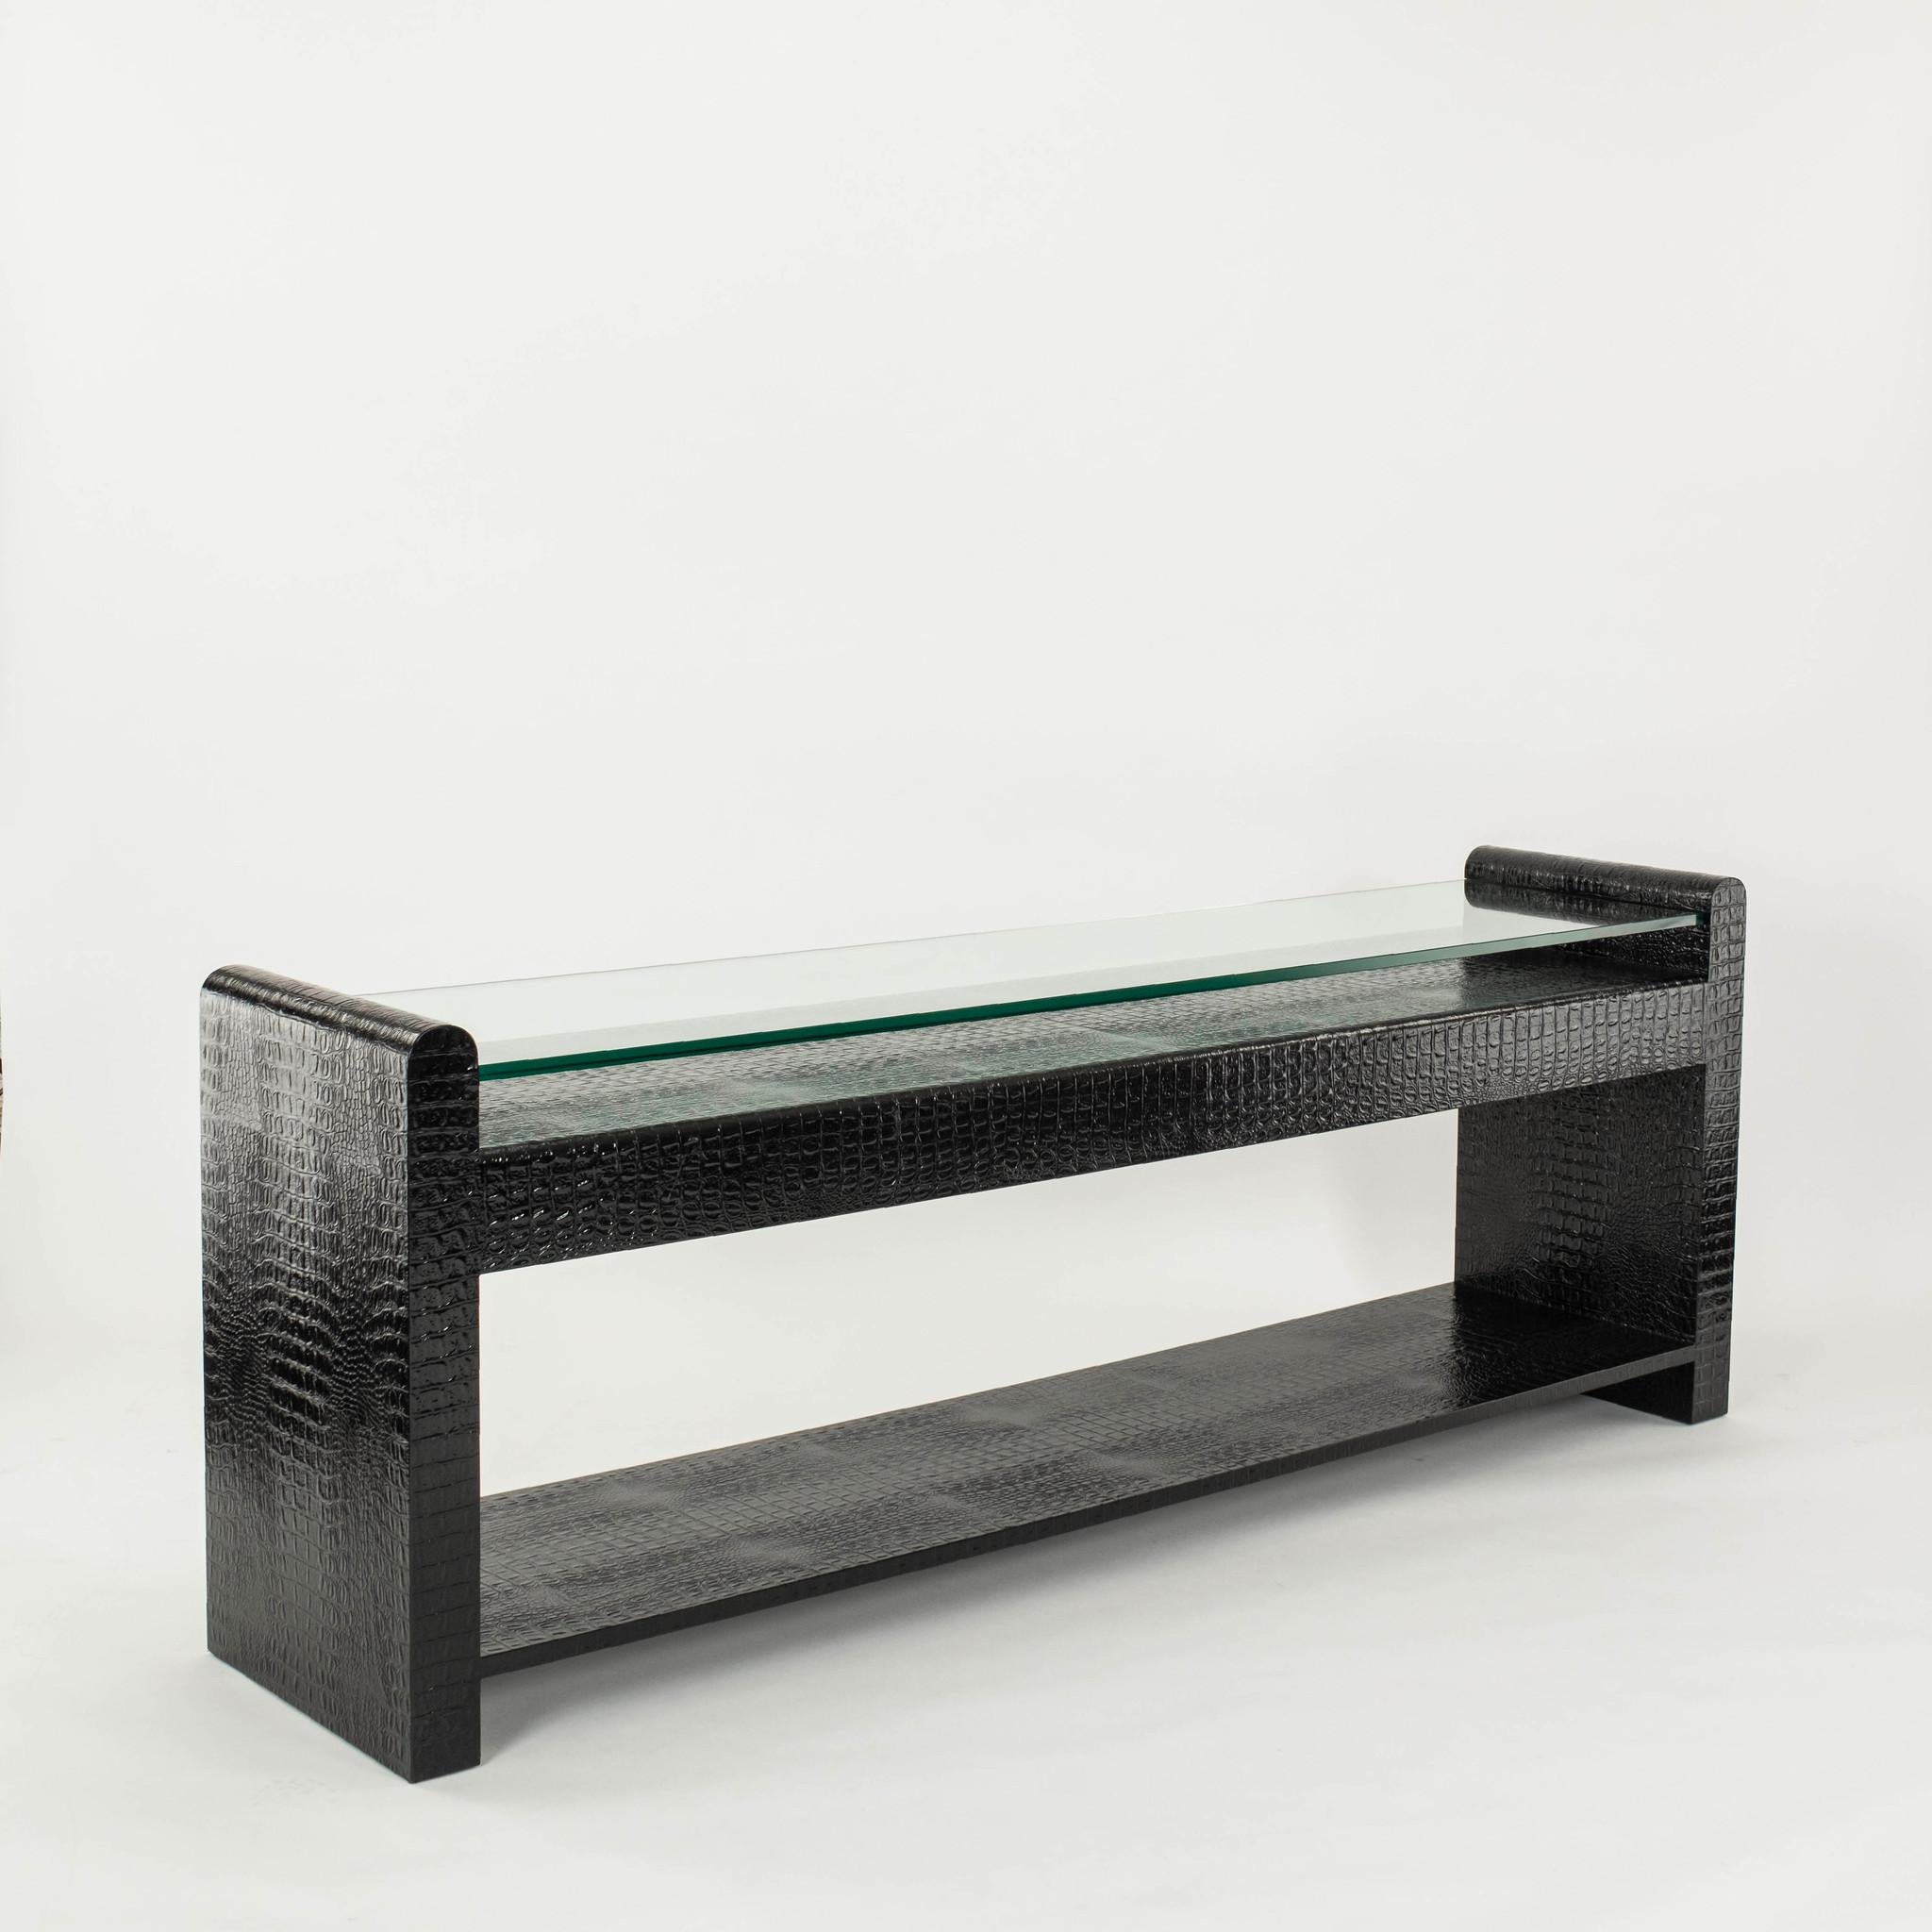 A handsome and stately black crocodile embossed leather console with 3/4